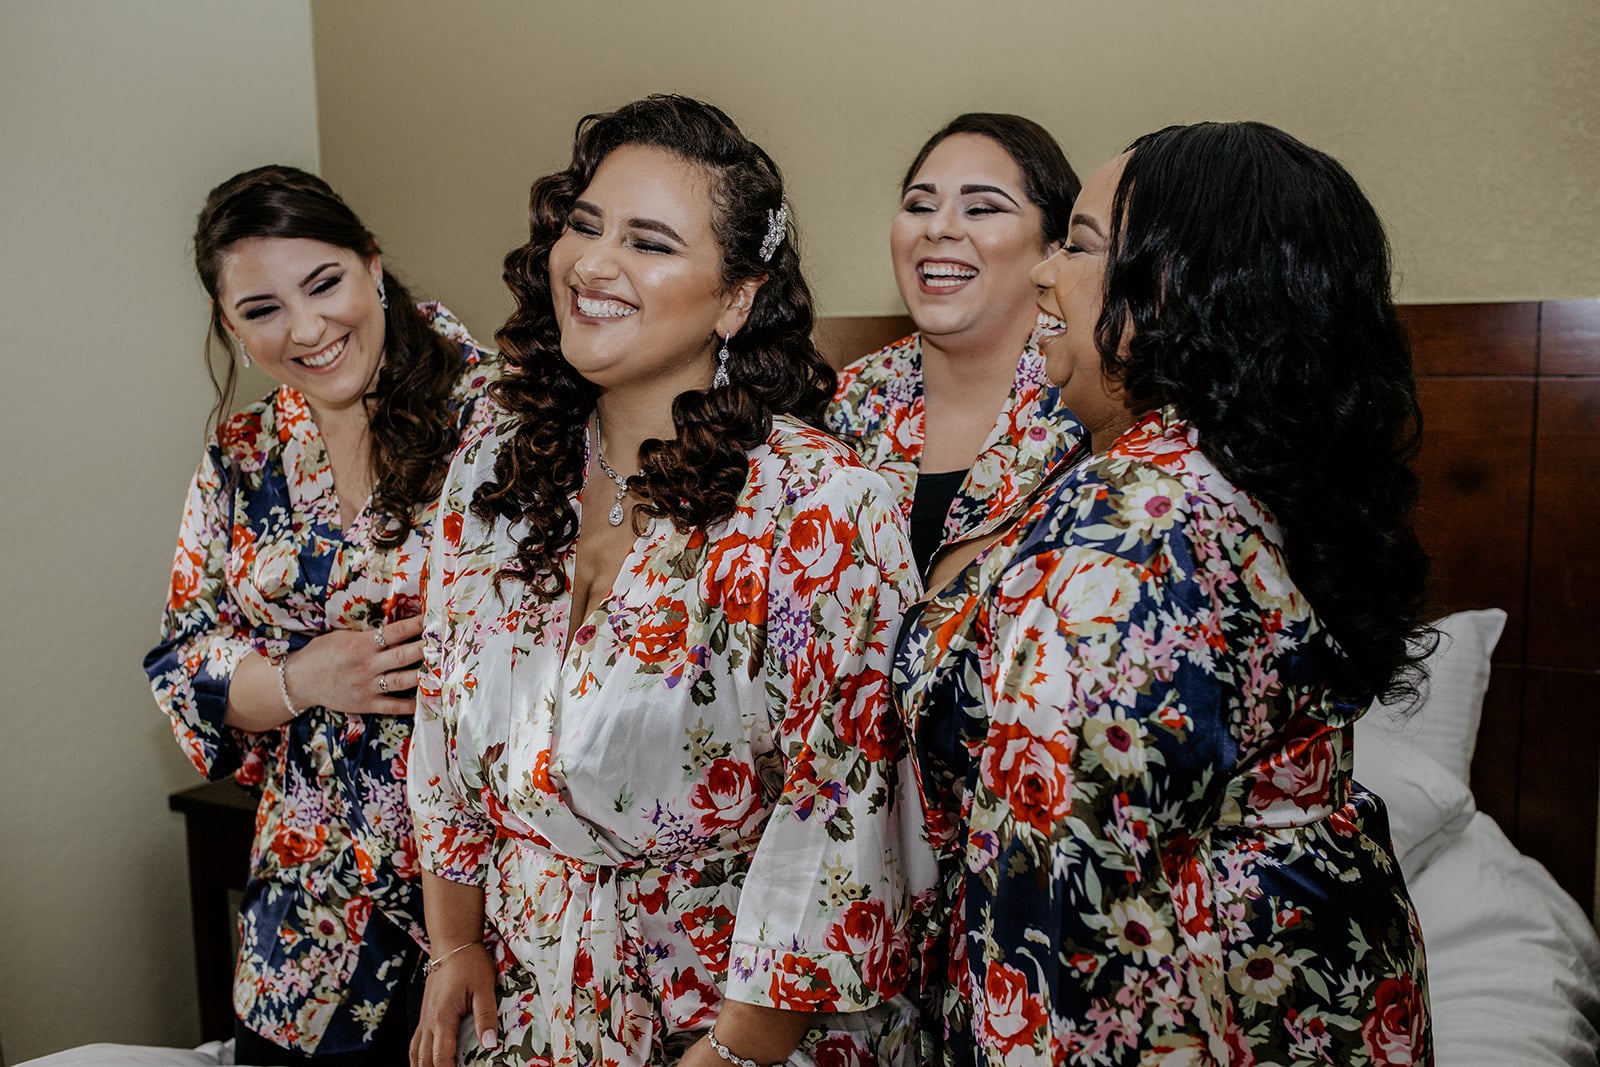 Gabriella Anthoney's Design Artistry bride and bridesmaids in robes getting ready for big day